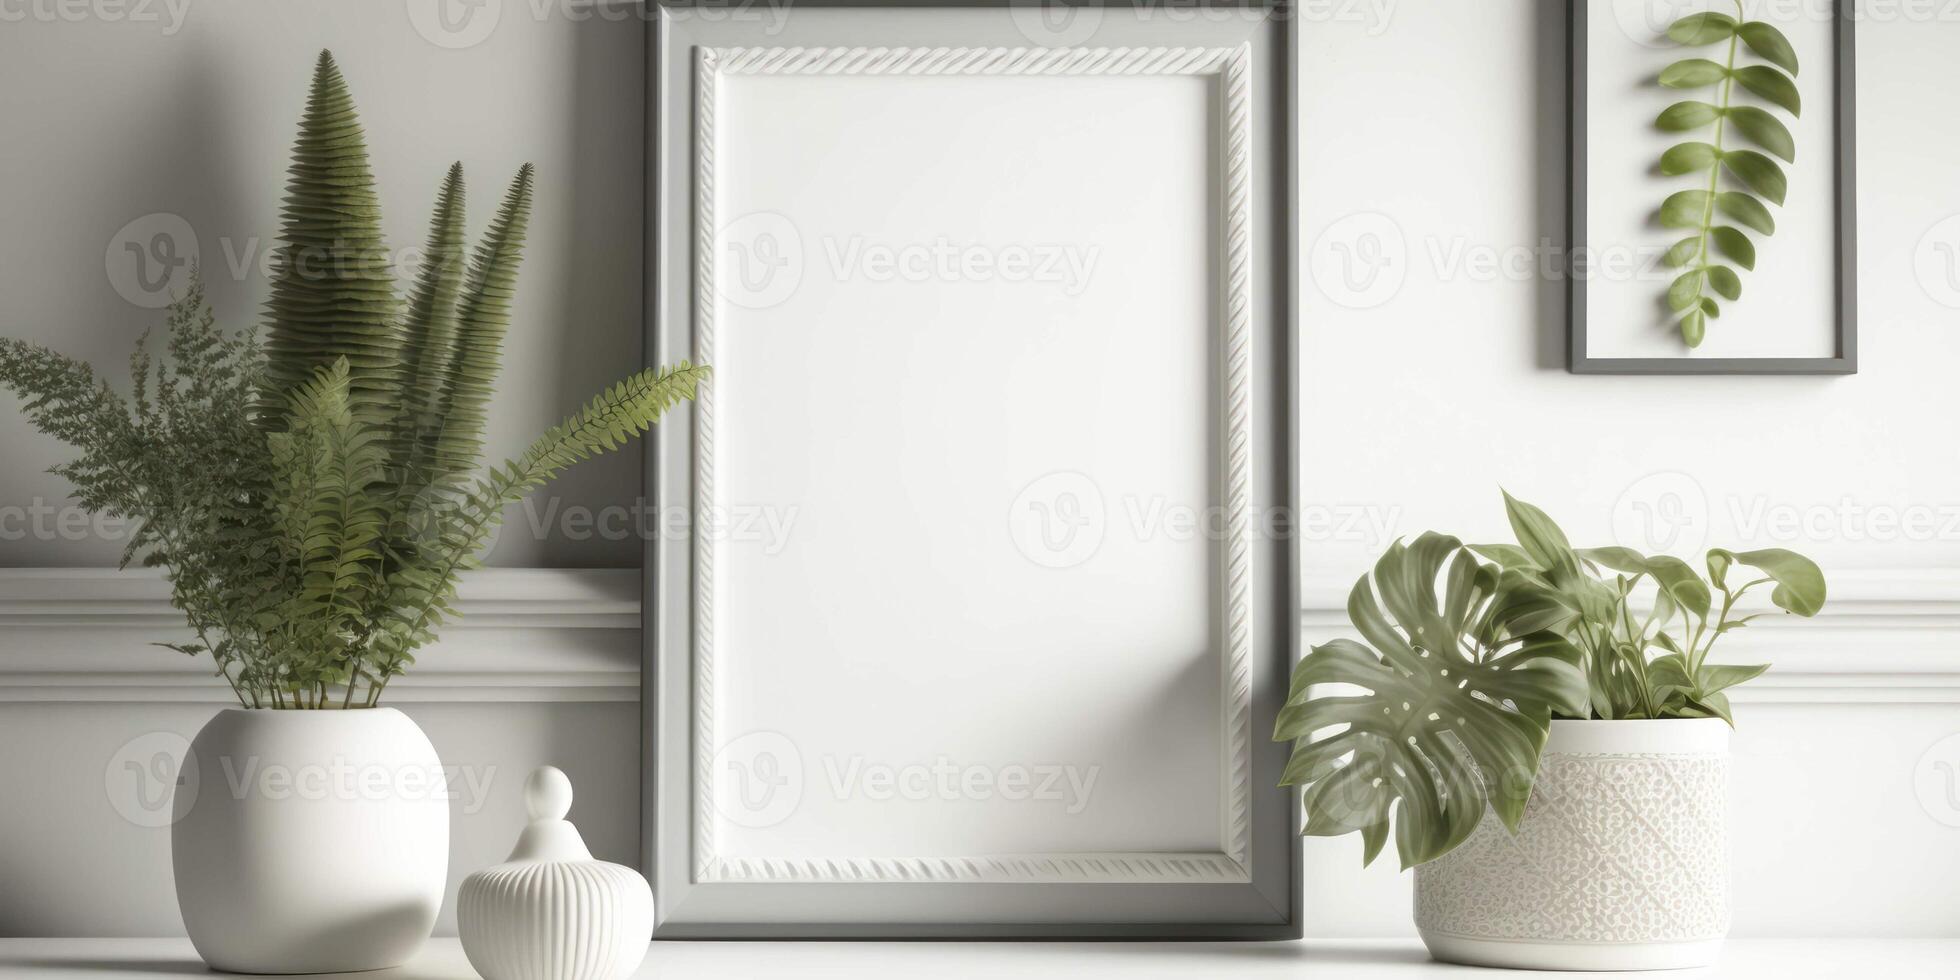 View Of Photo Frames With Home Decor And Interior Design Photo | JPG Free  Download - Pikbest